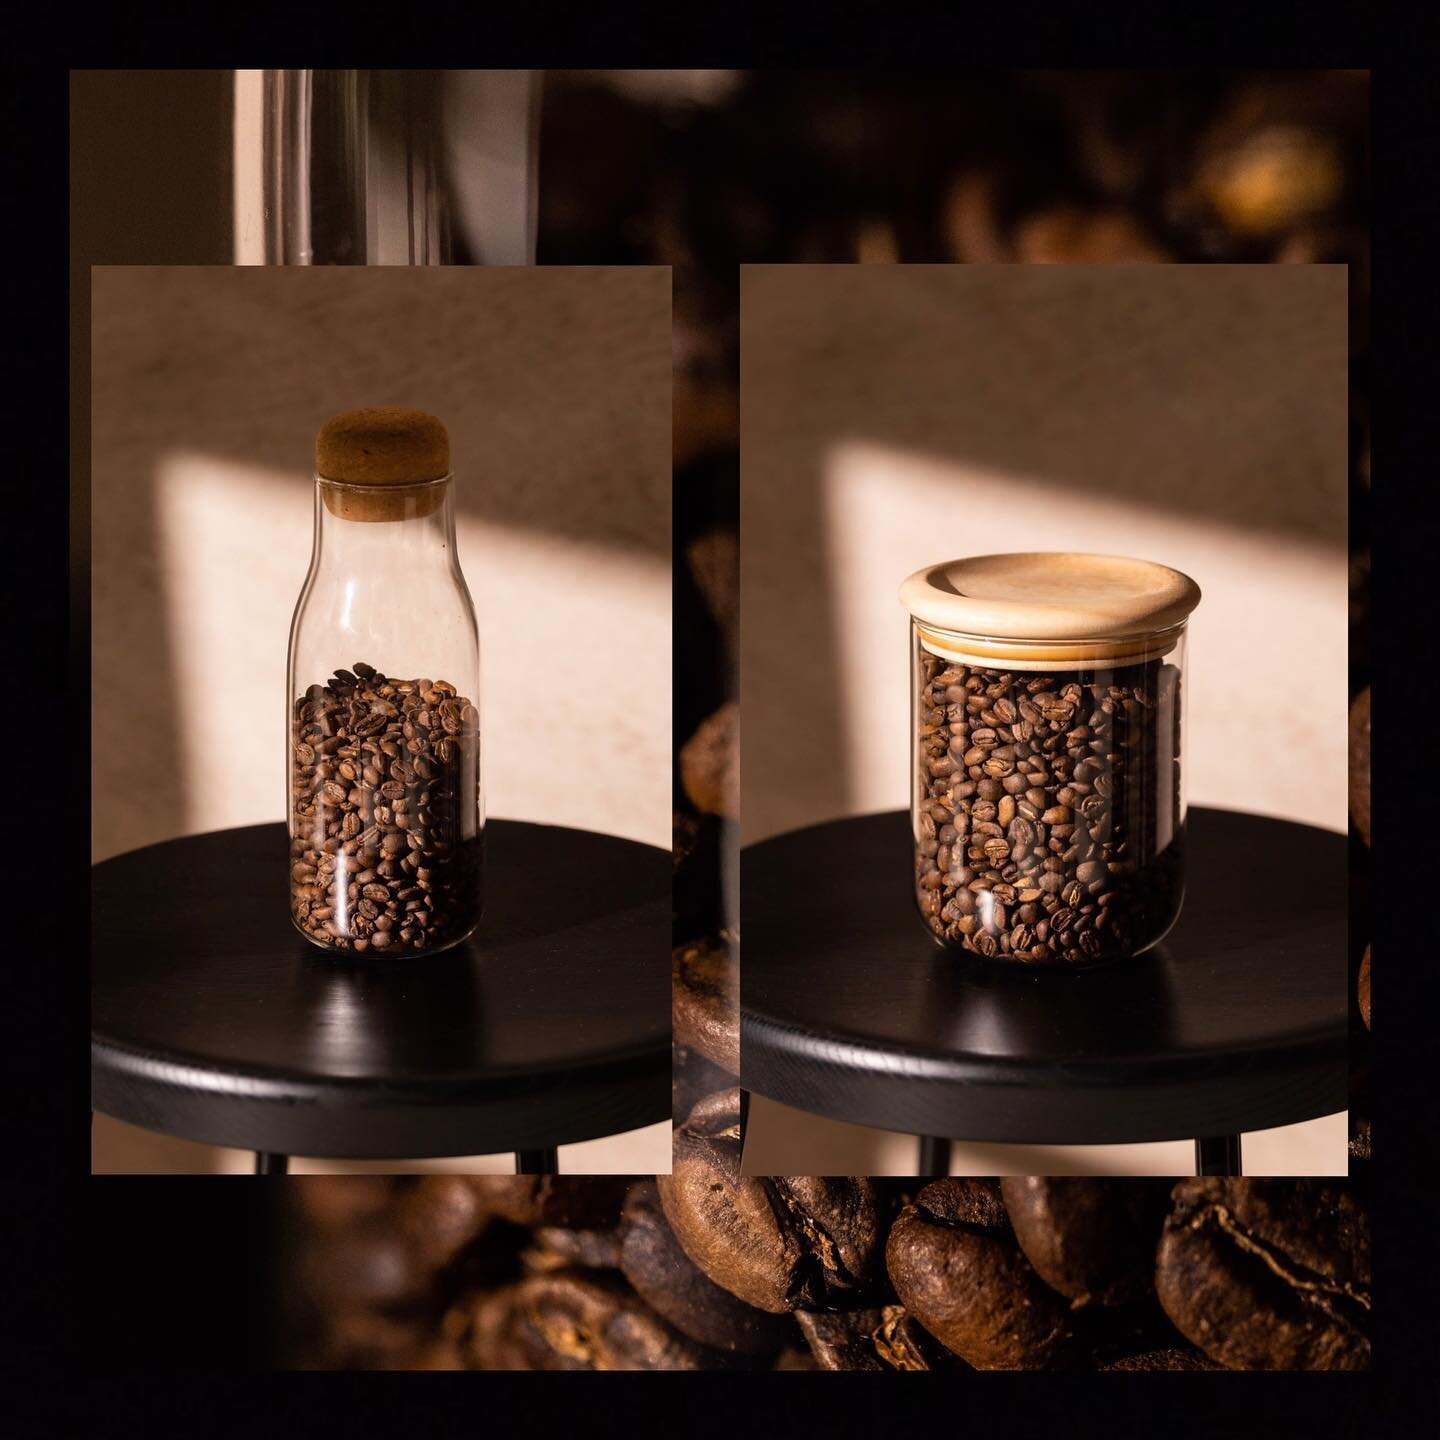 Our @kintojapan range doesn&rsquo;t just cover mugs or cups to drink out of. We&rsquo;ve got your coffee bean storage covered too. Check out our range of products next time you&rsquo;re in our ask our expert barista to point them out for you!